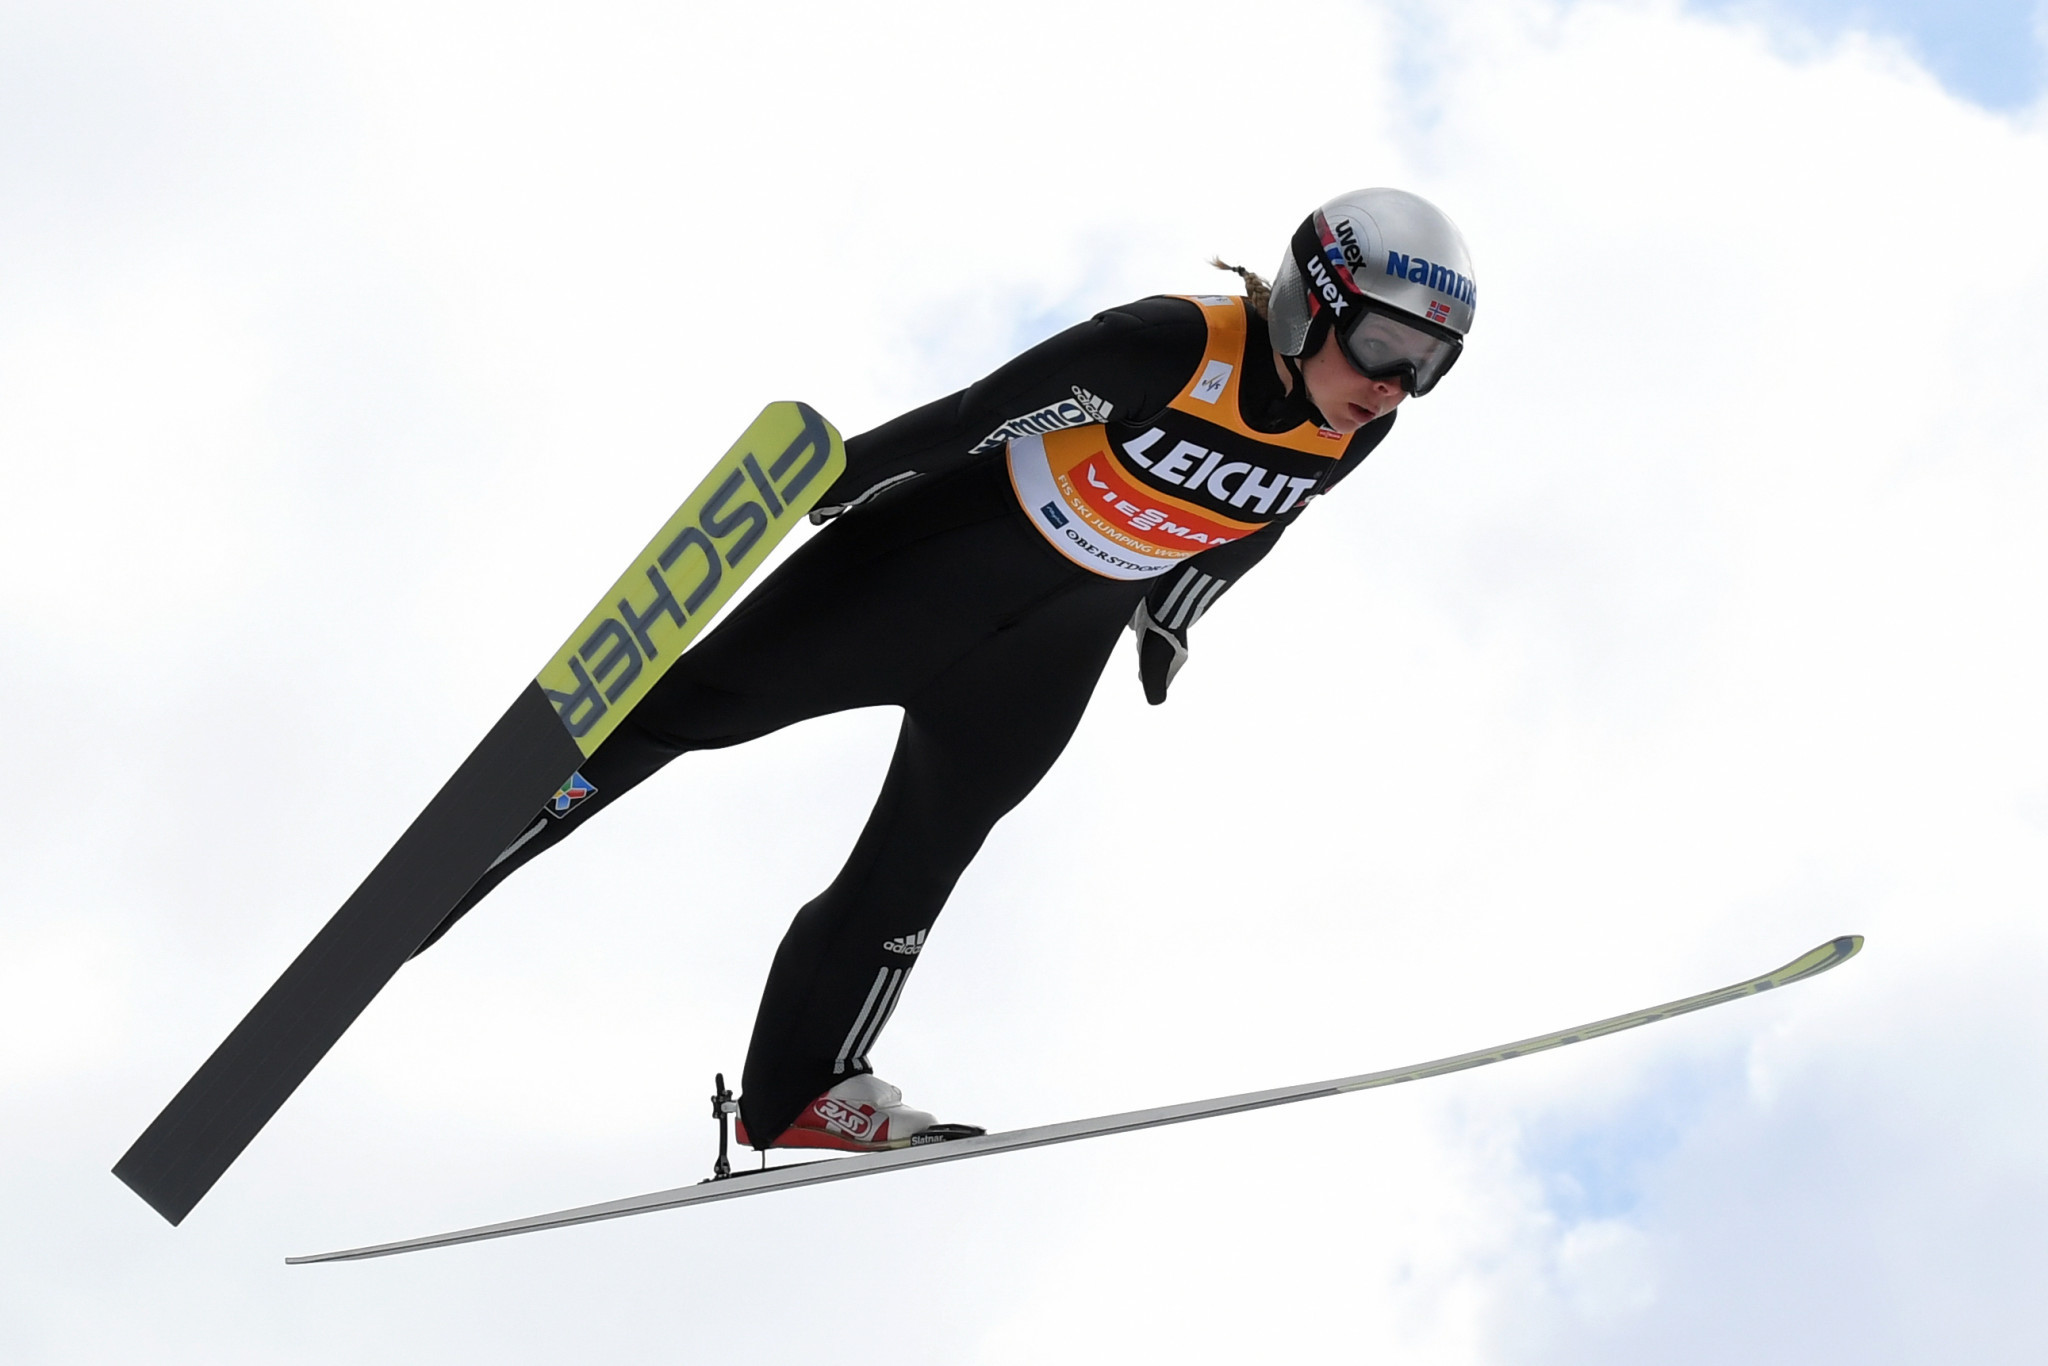 Maren Lundby of Norway finished first in qualifying for the FIS Women's Ski Jumping World Cup in Sapporo ©Getty Images